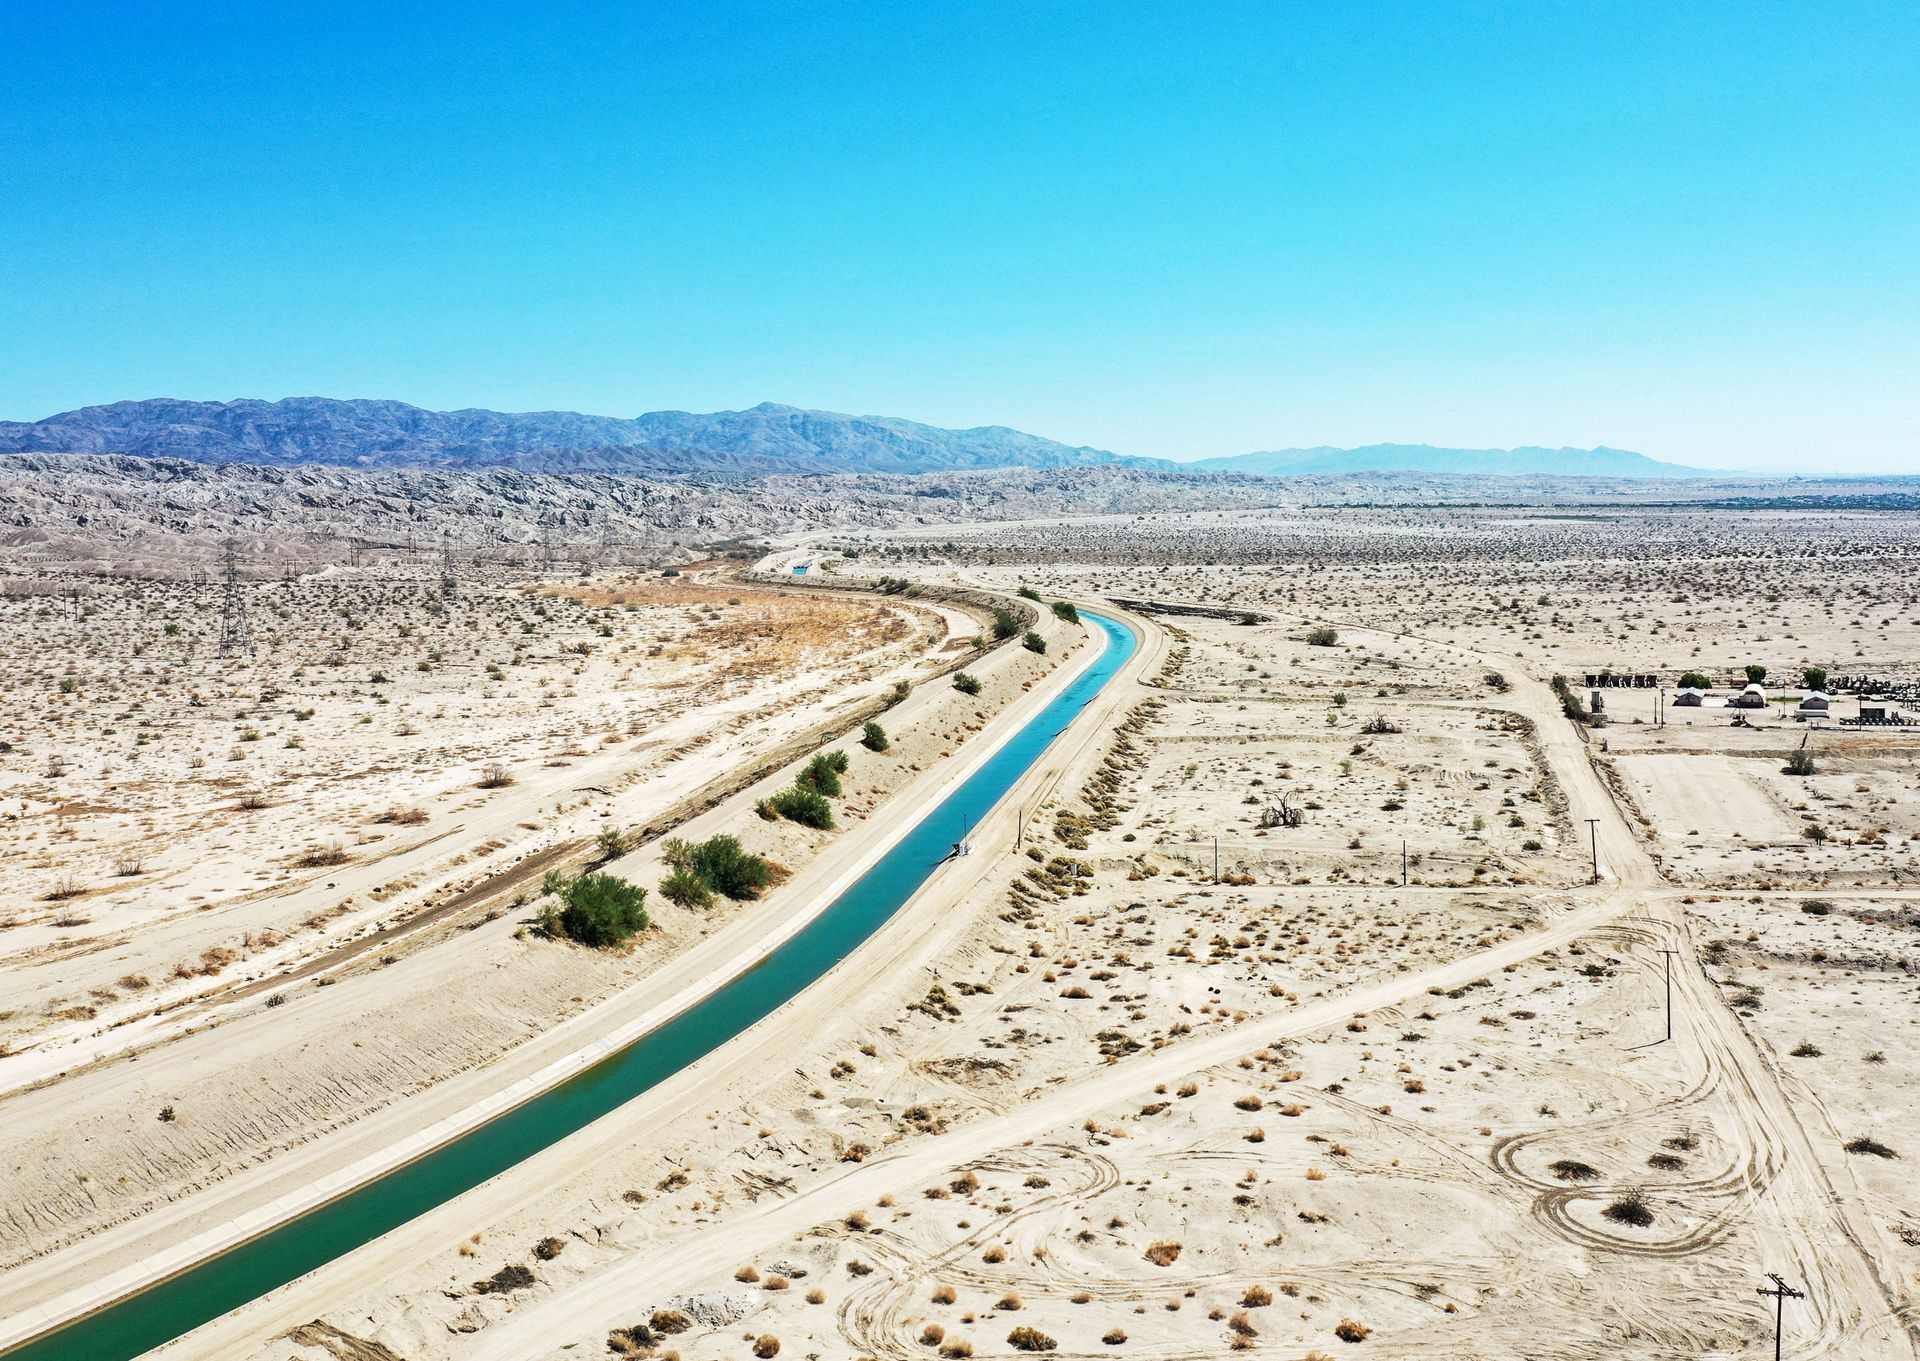 An aerial view of the Coachella canal, conveying Colorado river water, in Mecca, California, U.S., 19 September 2022. Photo: Aude Guerrucci / REUTERS